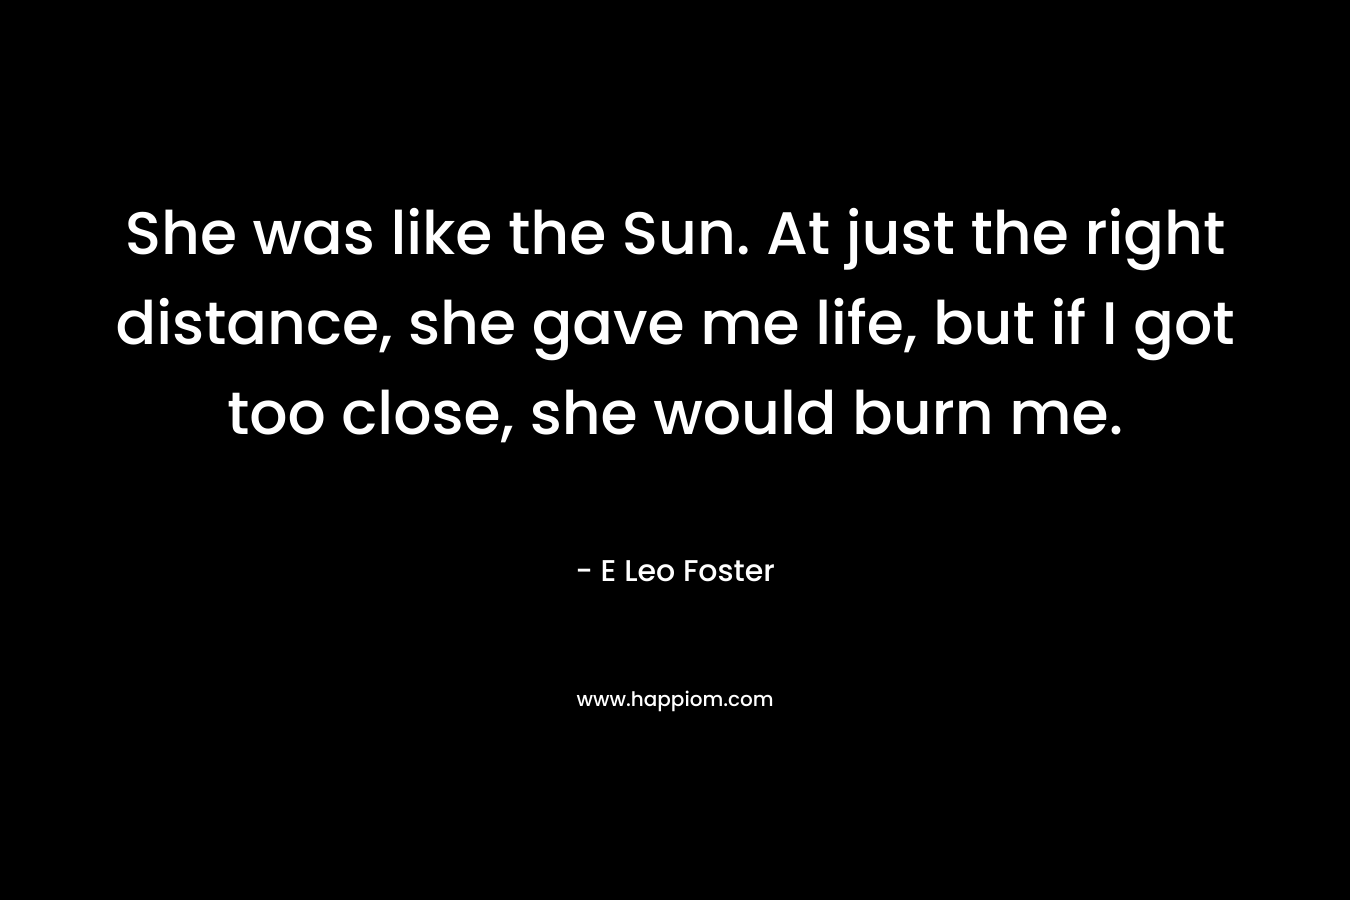 She was like the Sun. At just the right distance, she gave me life, but if I got too close, she would burn me. – E Leo Foster